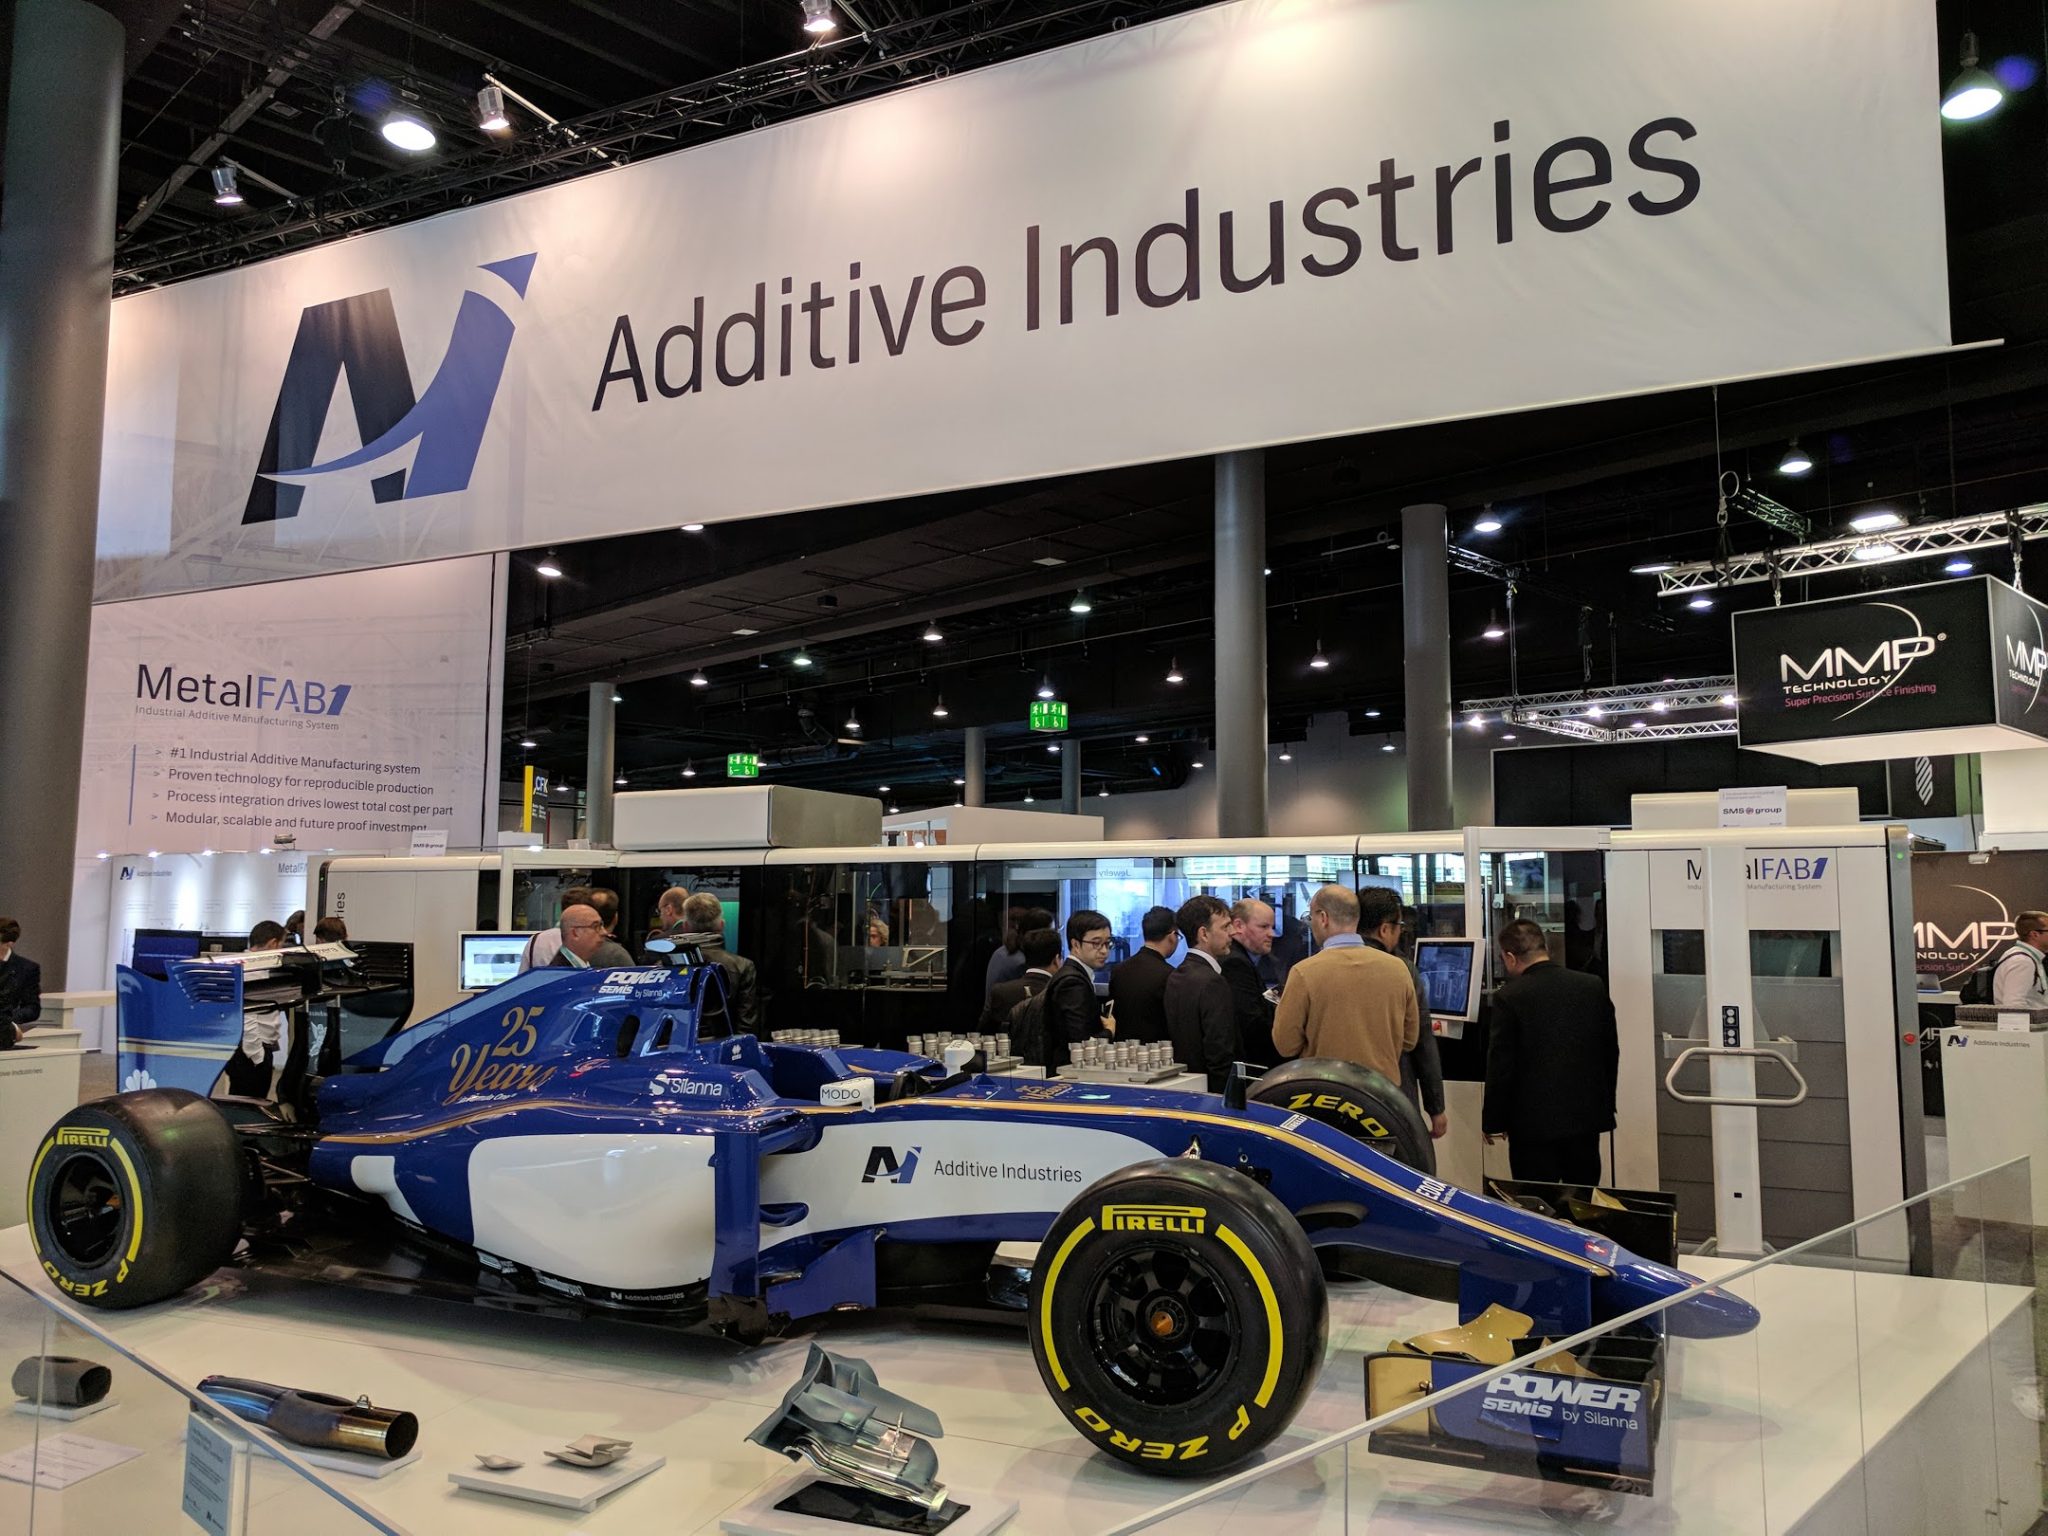 Additive Industries at formnext. Photo by Michael Petch.